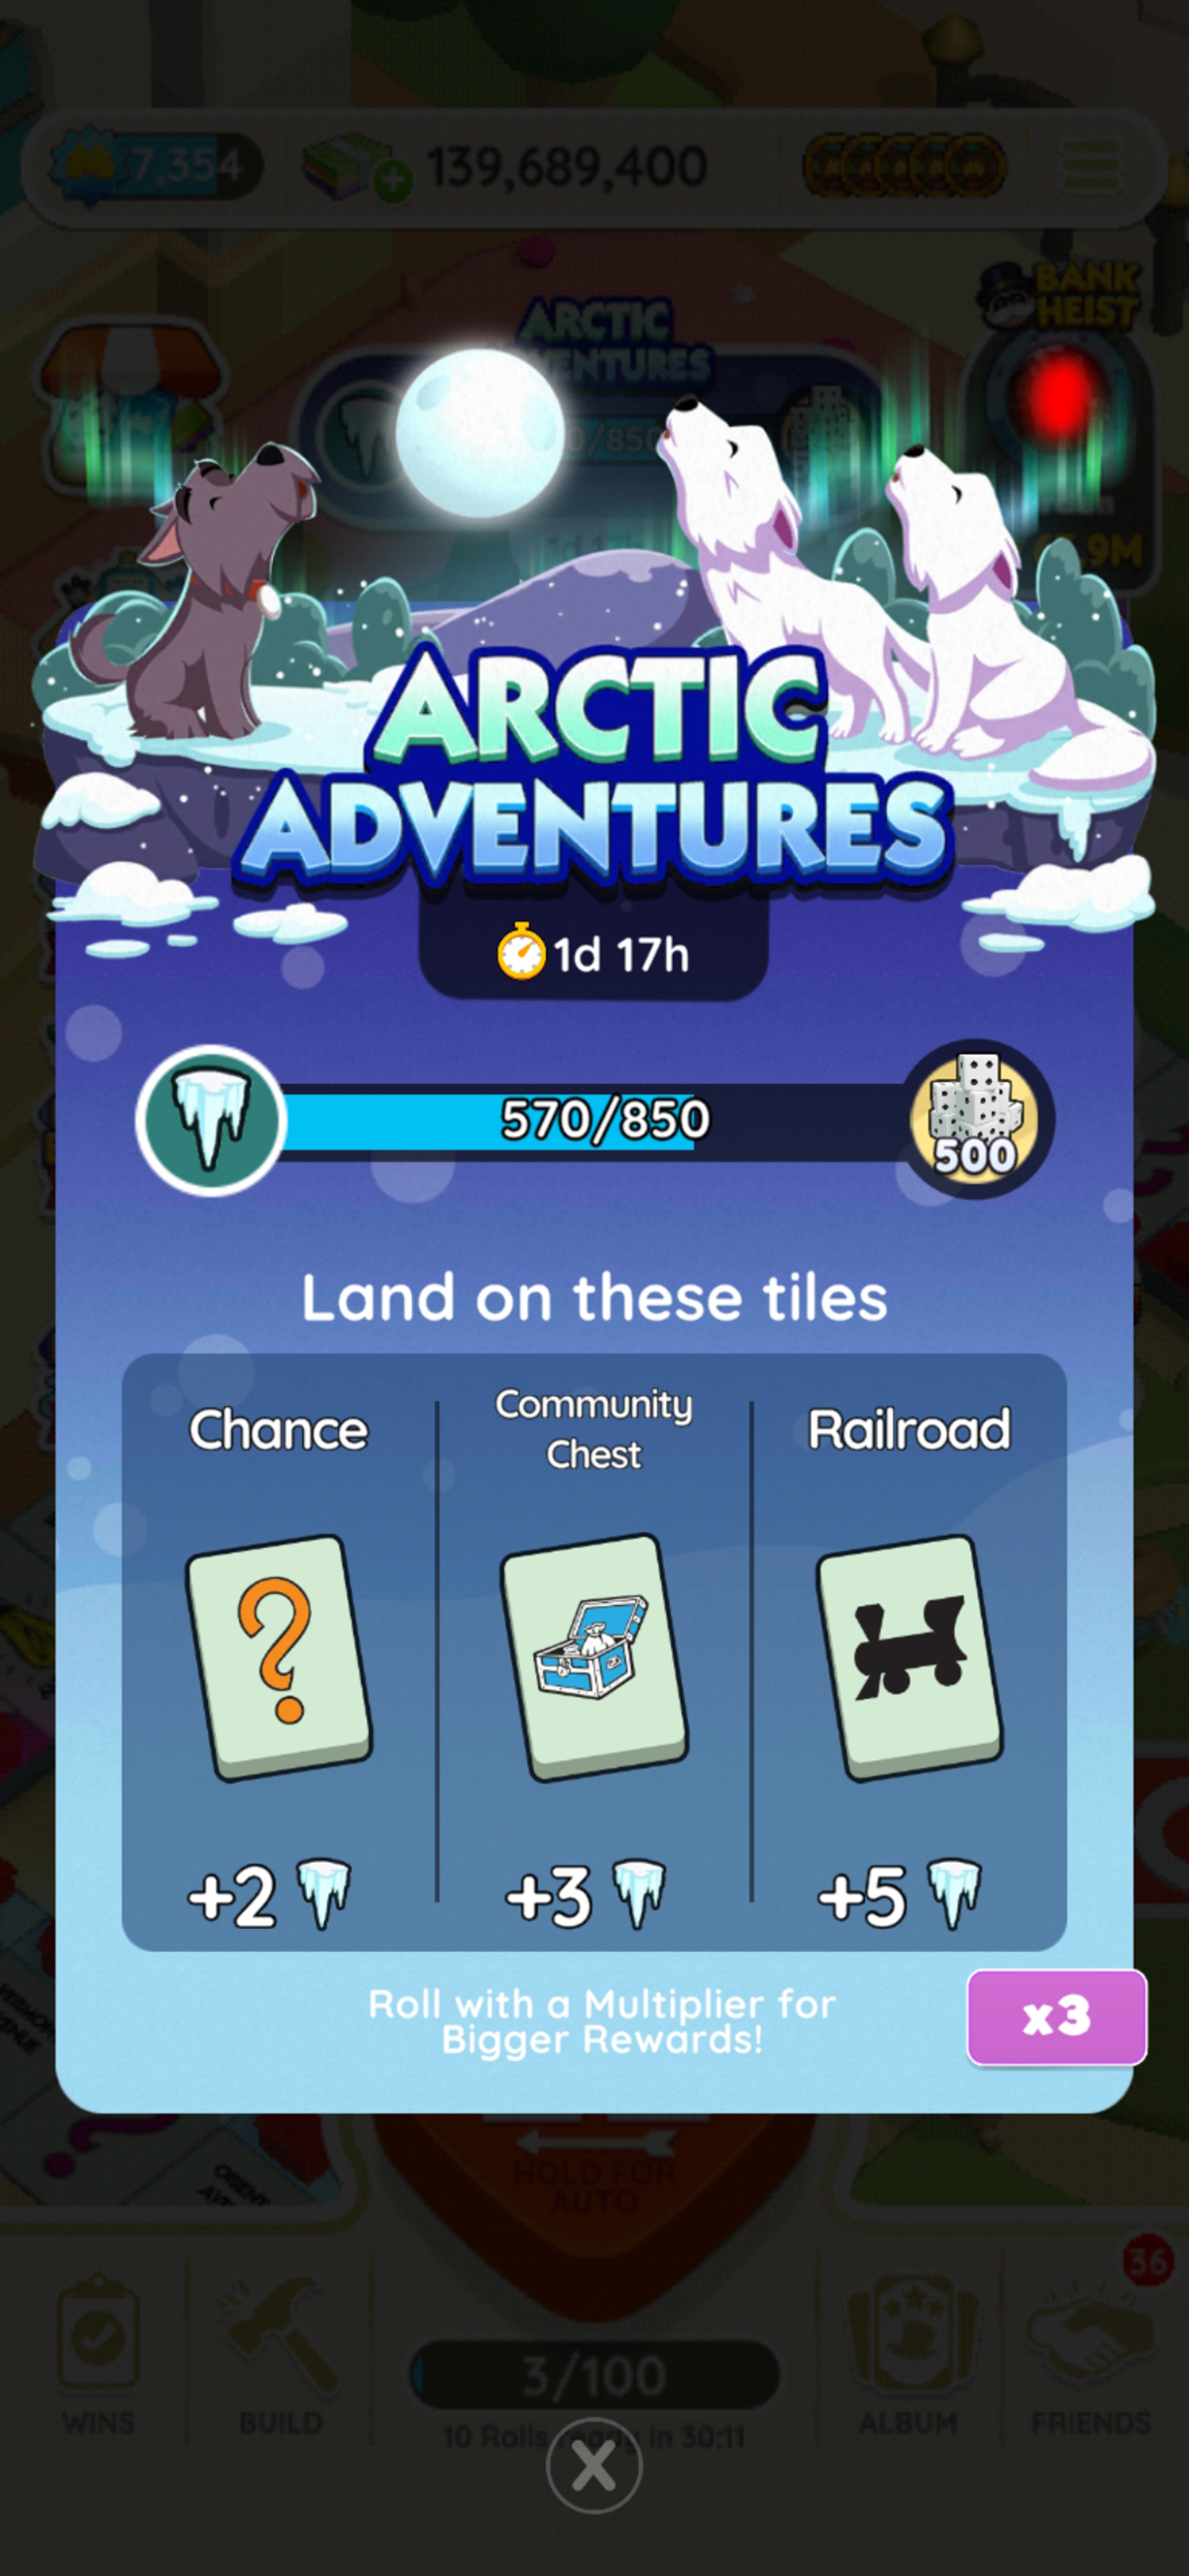 An image for the Arctic Adventures event in Monopoly GO showing three dogs howling at a full moon. The image is part of an article on all the rewards and milestones, listed, for the Arctic Adventures event in Monopoly GO.